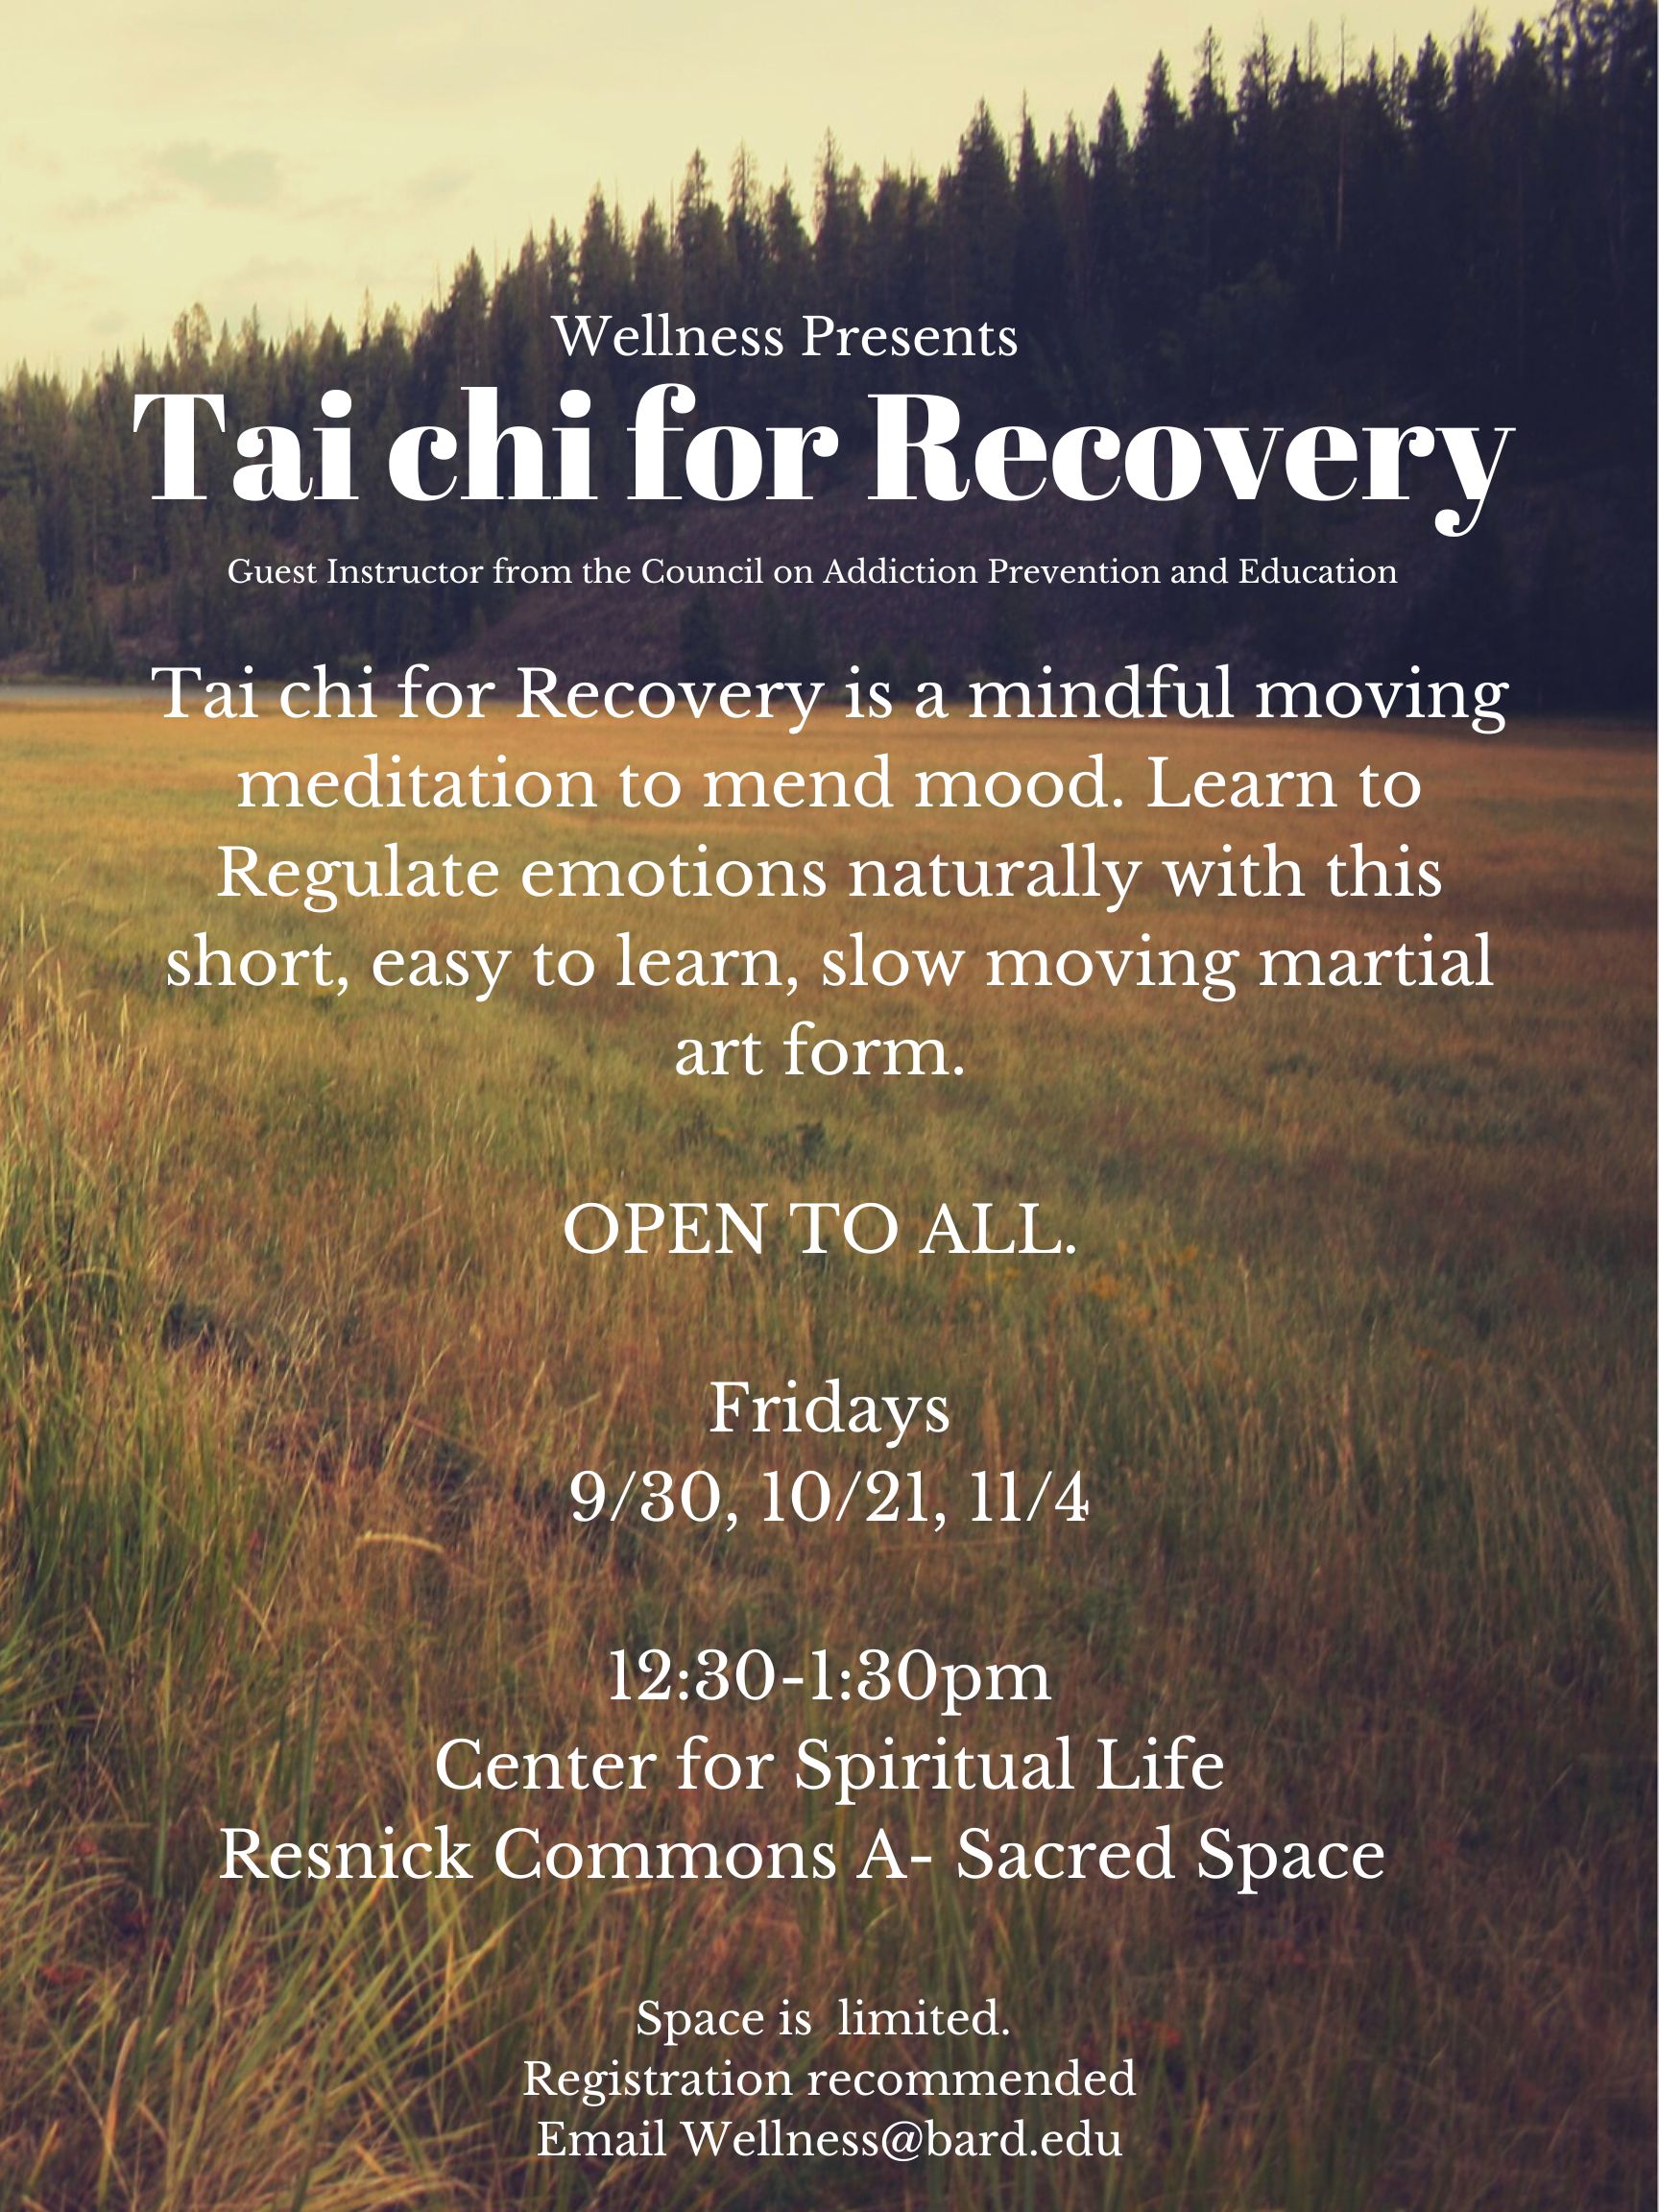 Tai chi for Recovery